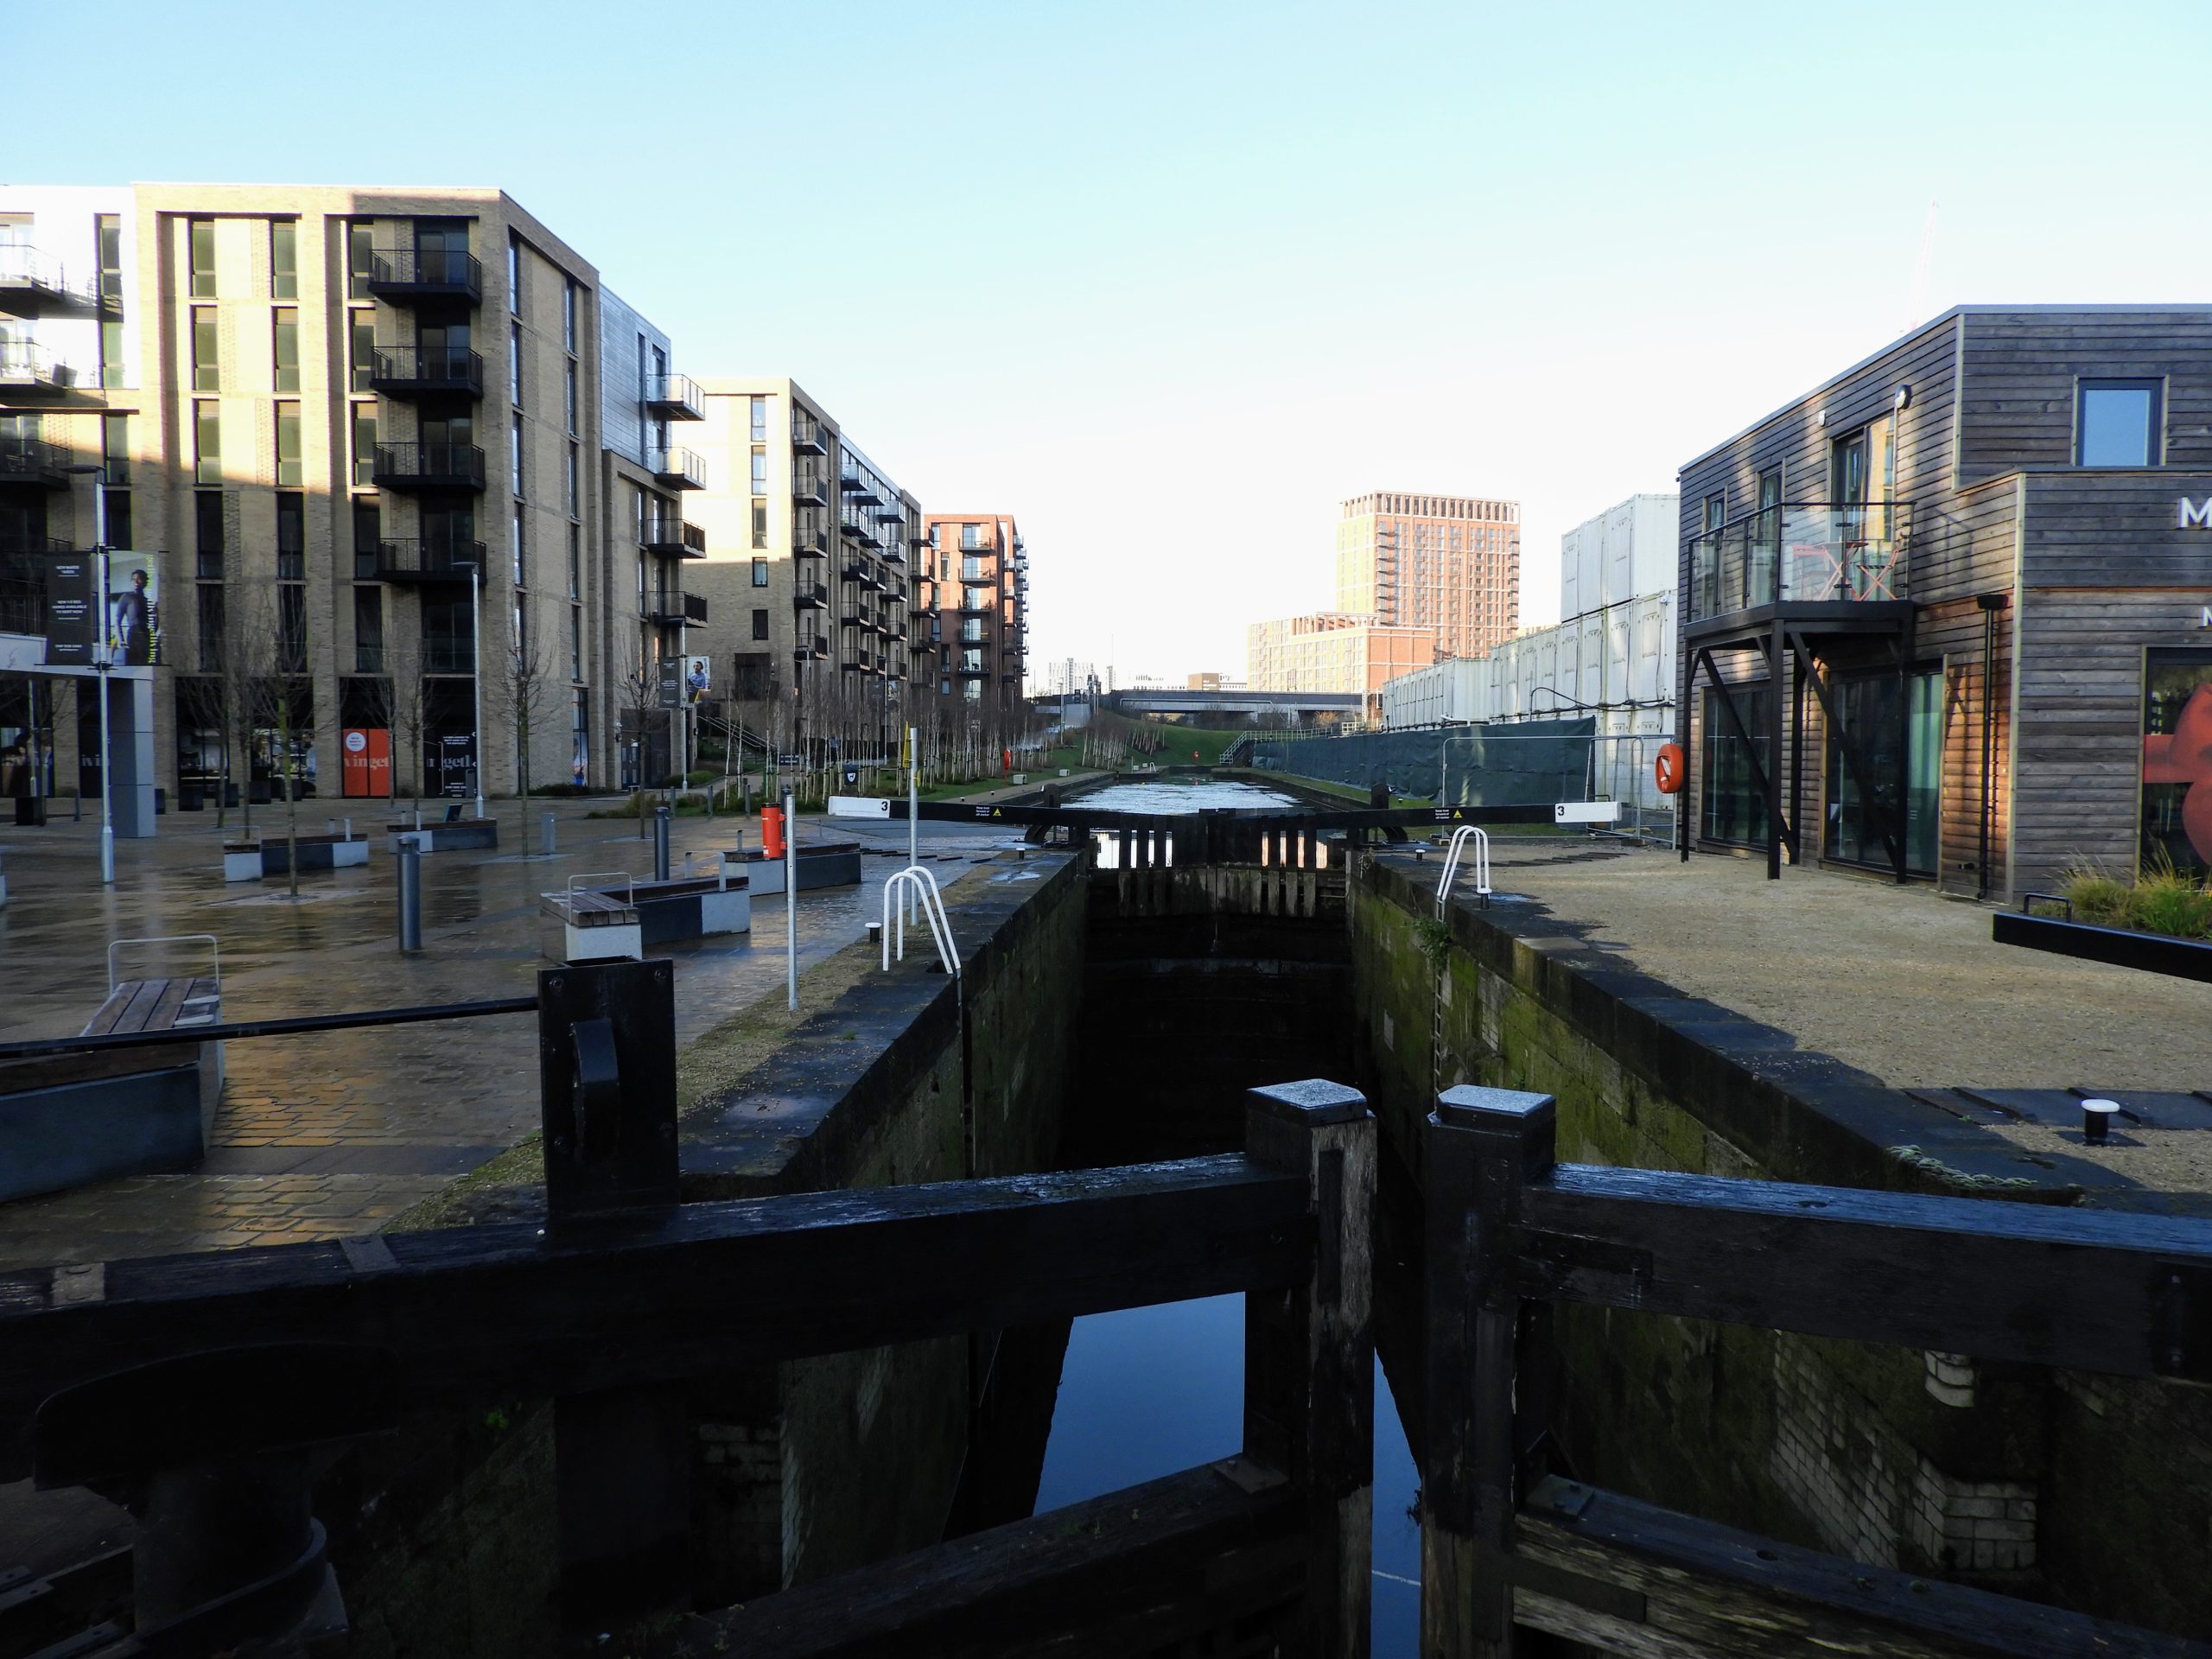 New festival to celebrate the canal on Middlewood Locks re-opening